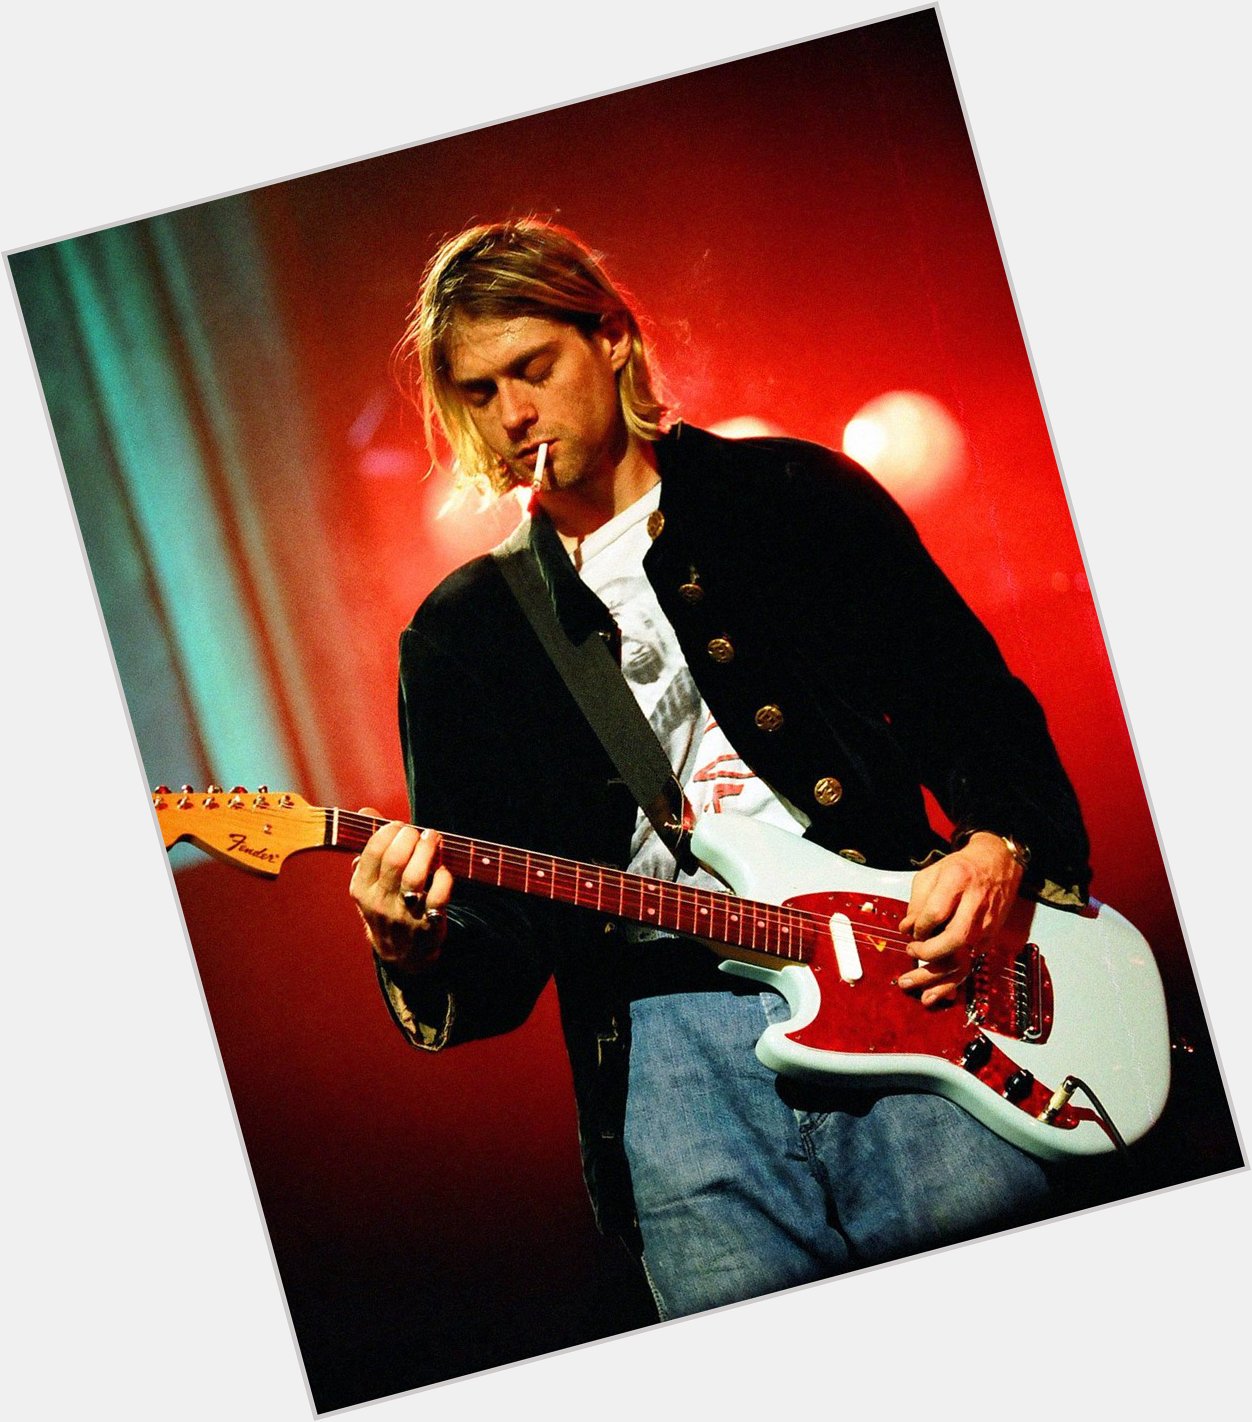 In loving memory of Kurt Cobain. Happy Birthday! Your legacy will live on forever. 